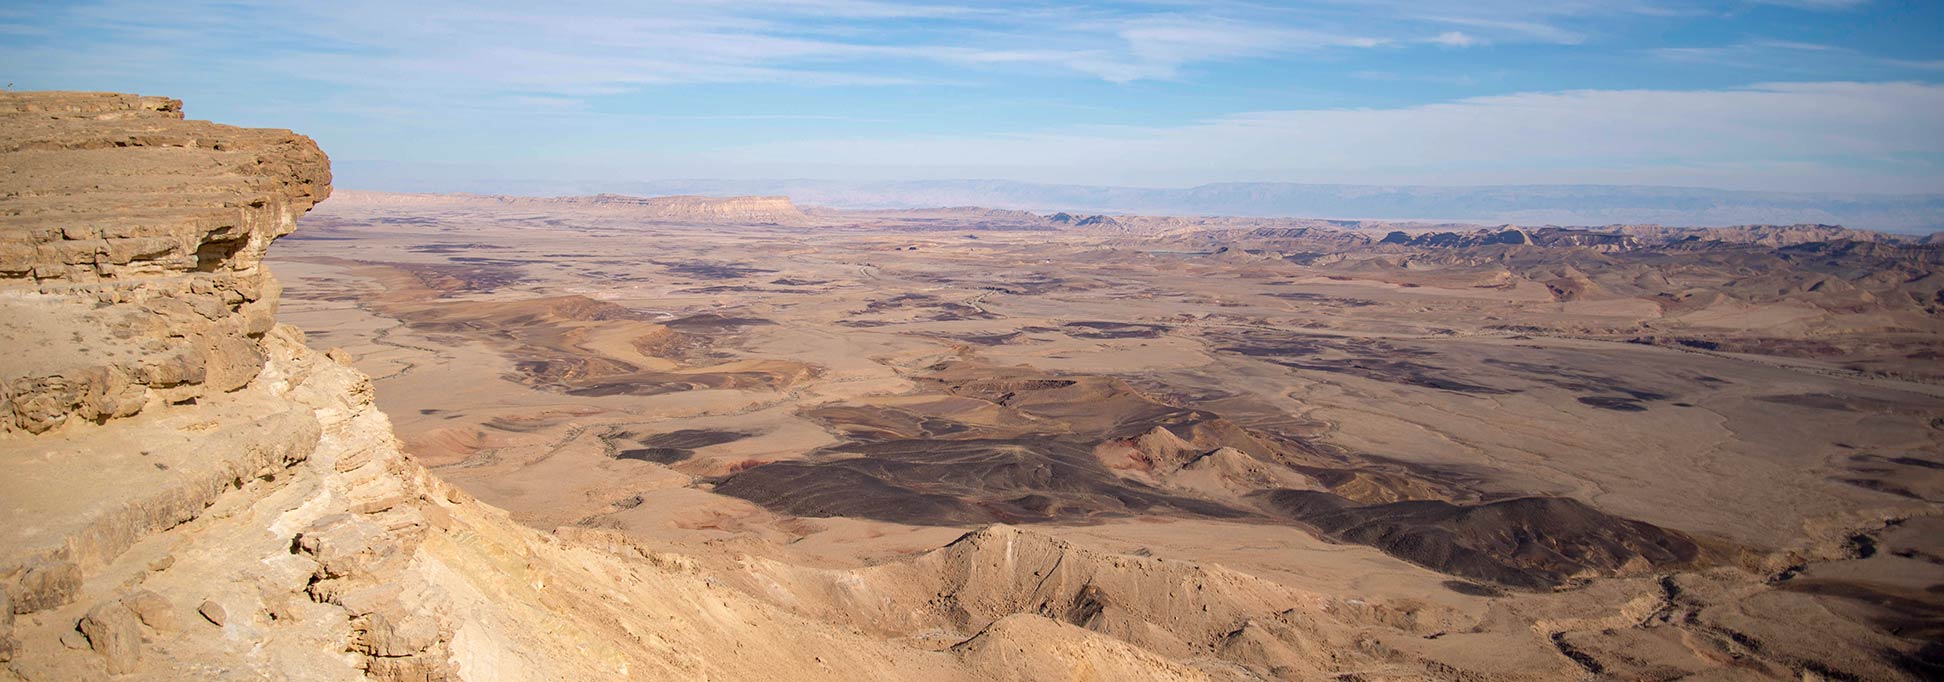 The Ramon Crater in the Negev desert of Israel